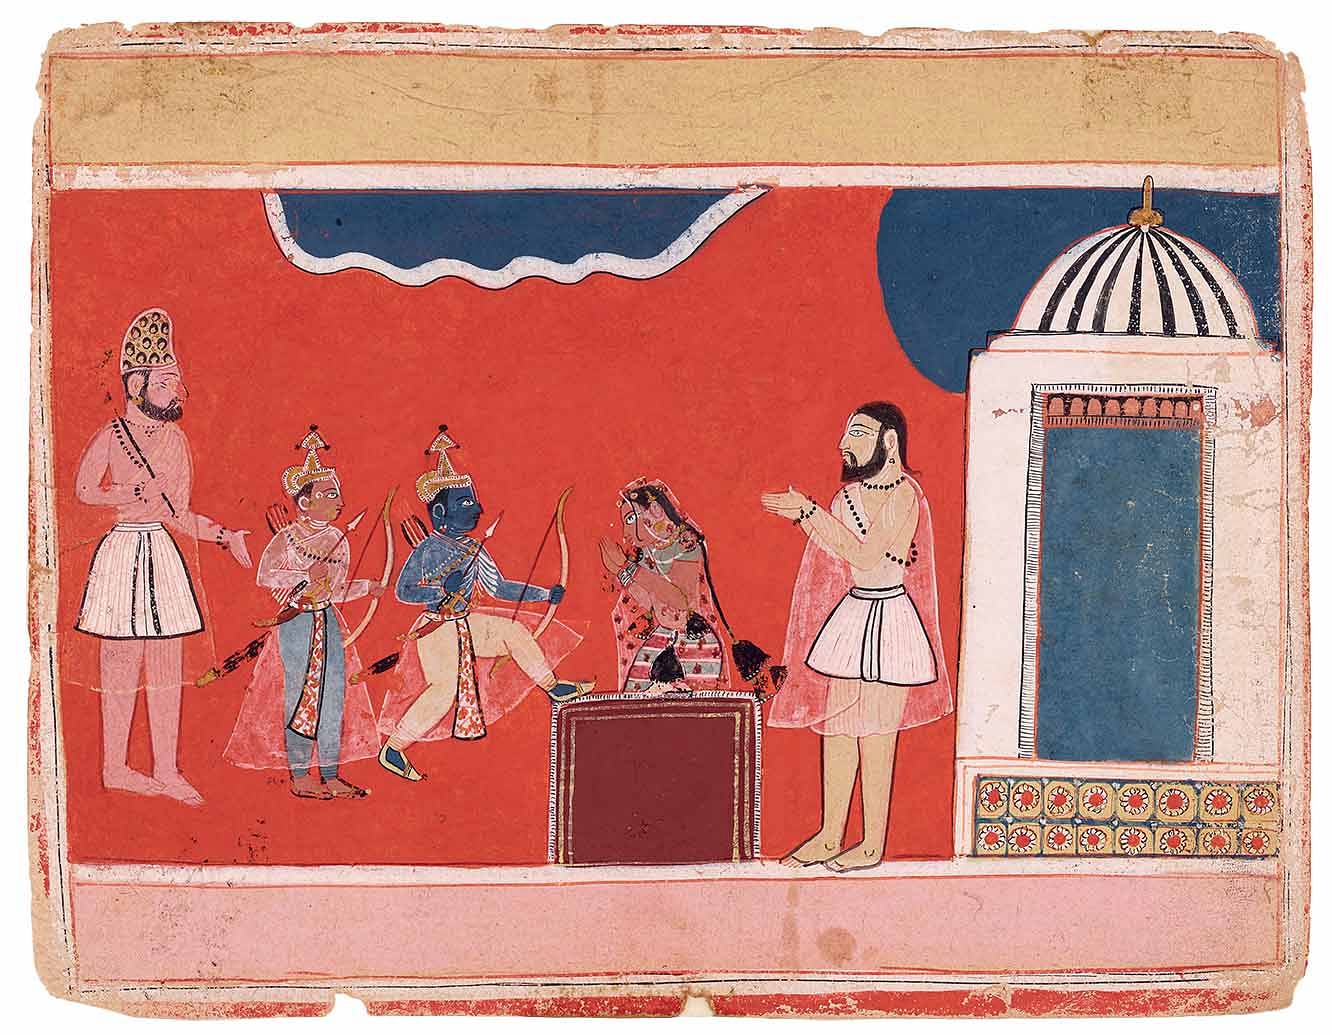 This image illustrates a version of the salvific act in which Ahalya had not been “lying on ashes” in the  ashram, but instead had been turned into a rock and would be  liberated when Rama touches the rock with his foot. This version is found in Tulsidas’s Ramacaritmanas, yet the petrification of  Ahalya was already a familiar ver-sion of the story before the appear-ance of the Ramacaritmanas. It seems unlikely that the Ramacaritmanas, which was written in Awadhi and whose earliest sections were composed in 1574, should in 1600 have been known and read at the court of Orchha | Niyogi Books